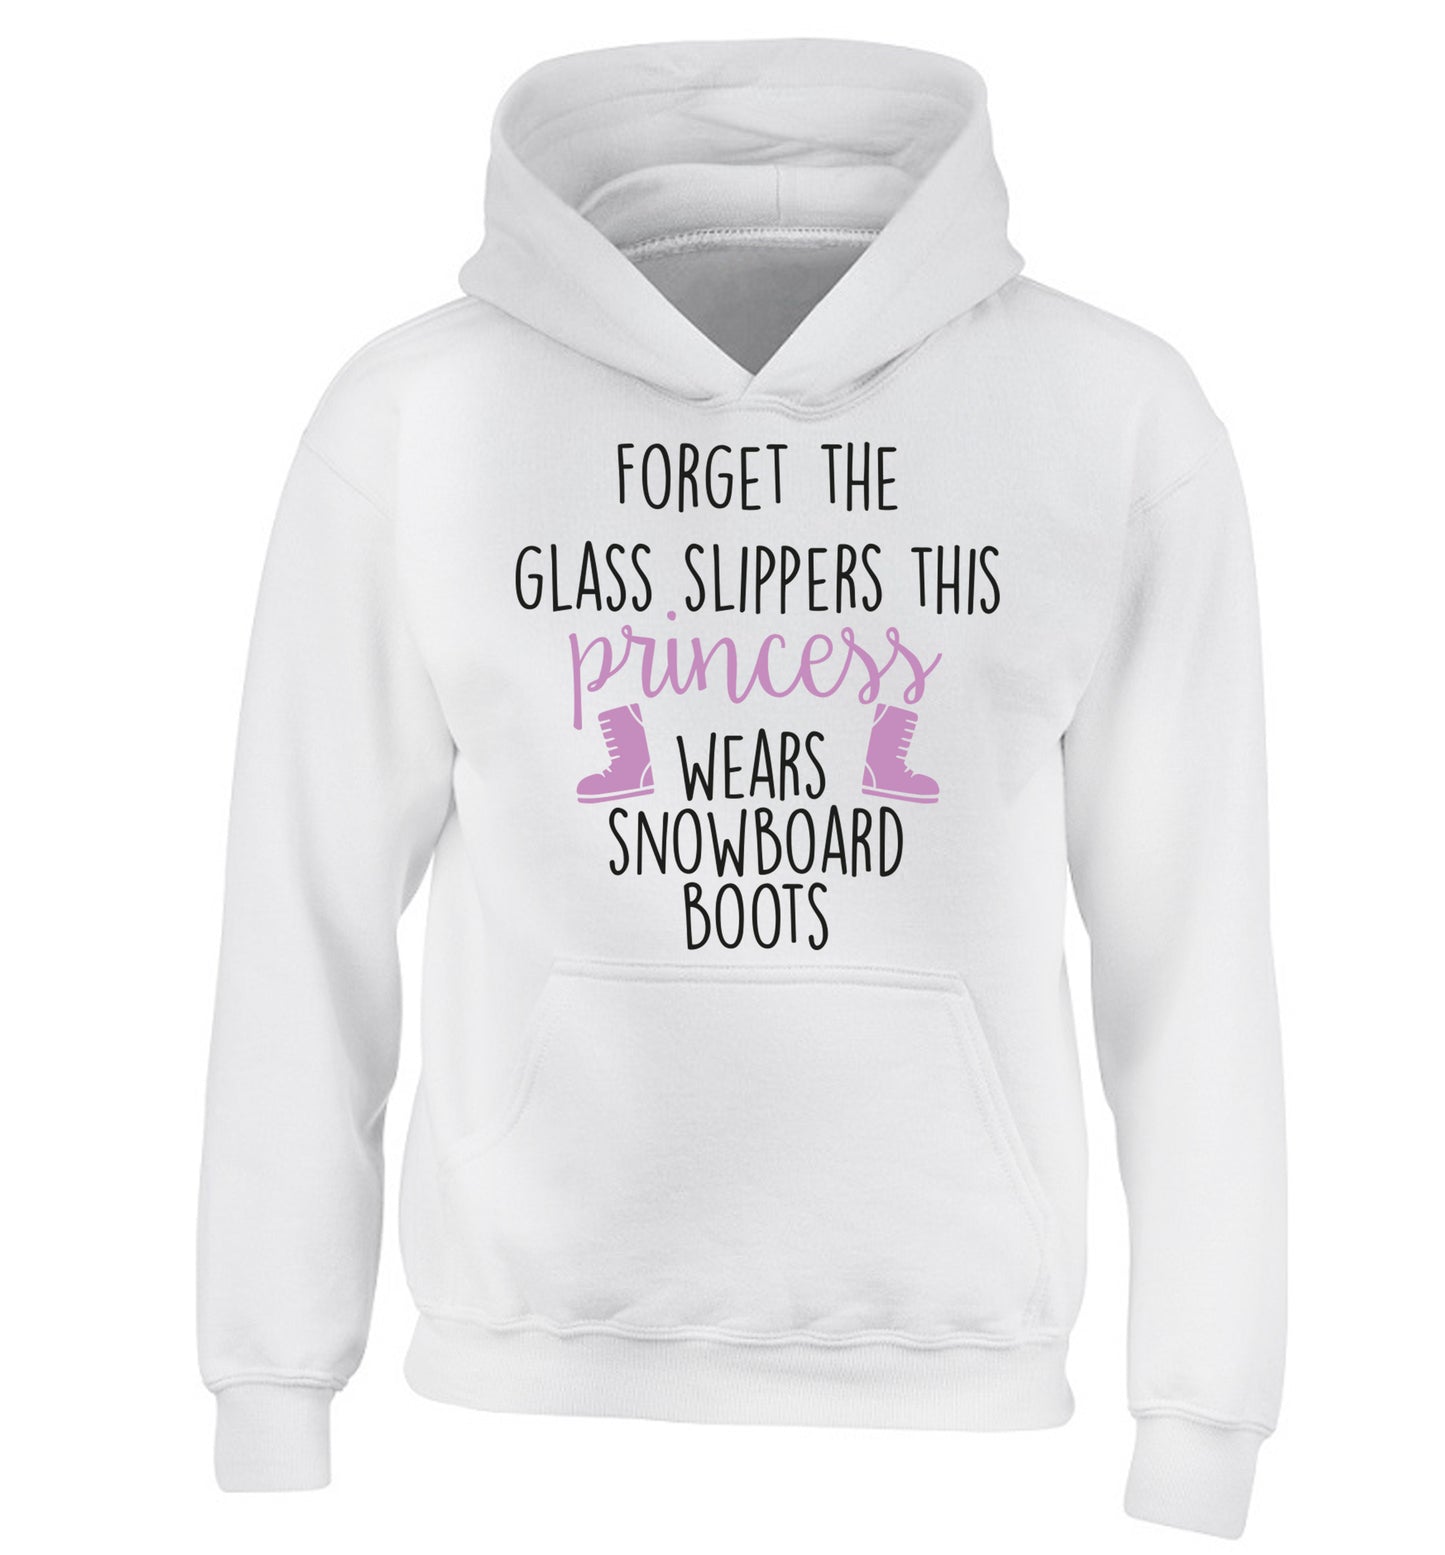 Forget the glass slippers this princess wears snowboard boots children's white hoodie 12-14 Years